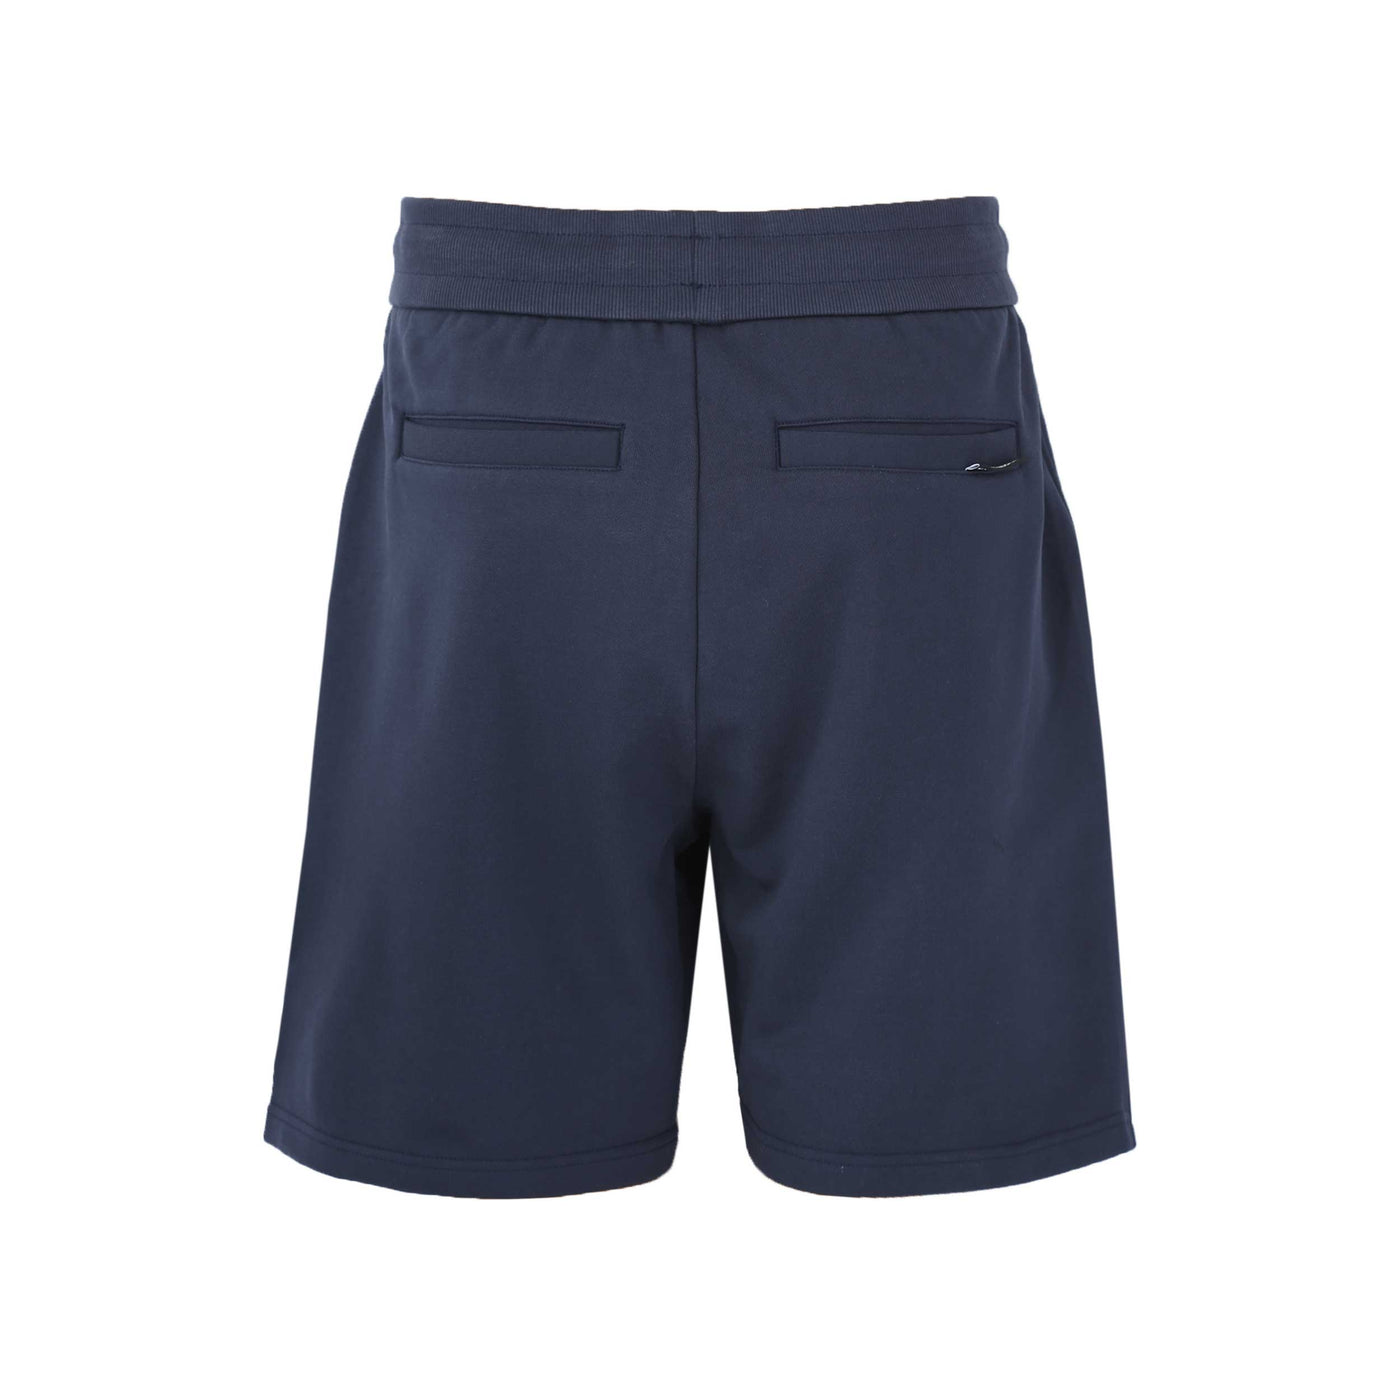 Moose Knuckles Gifford Shorts Sweat Short in Navy Back